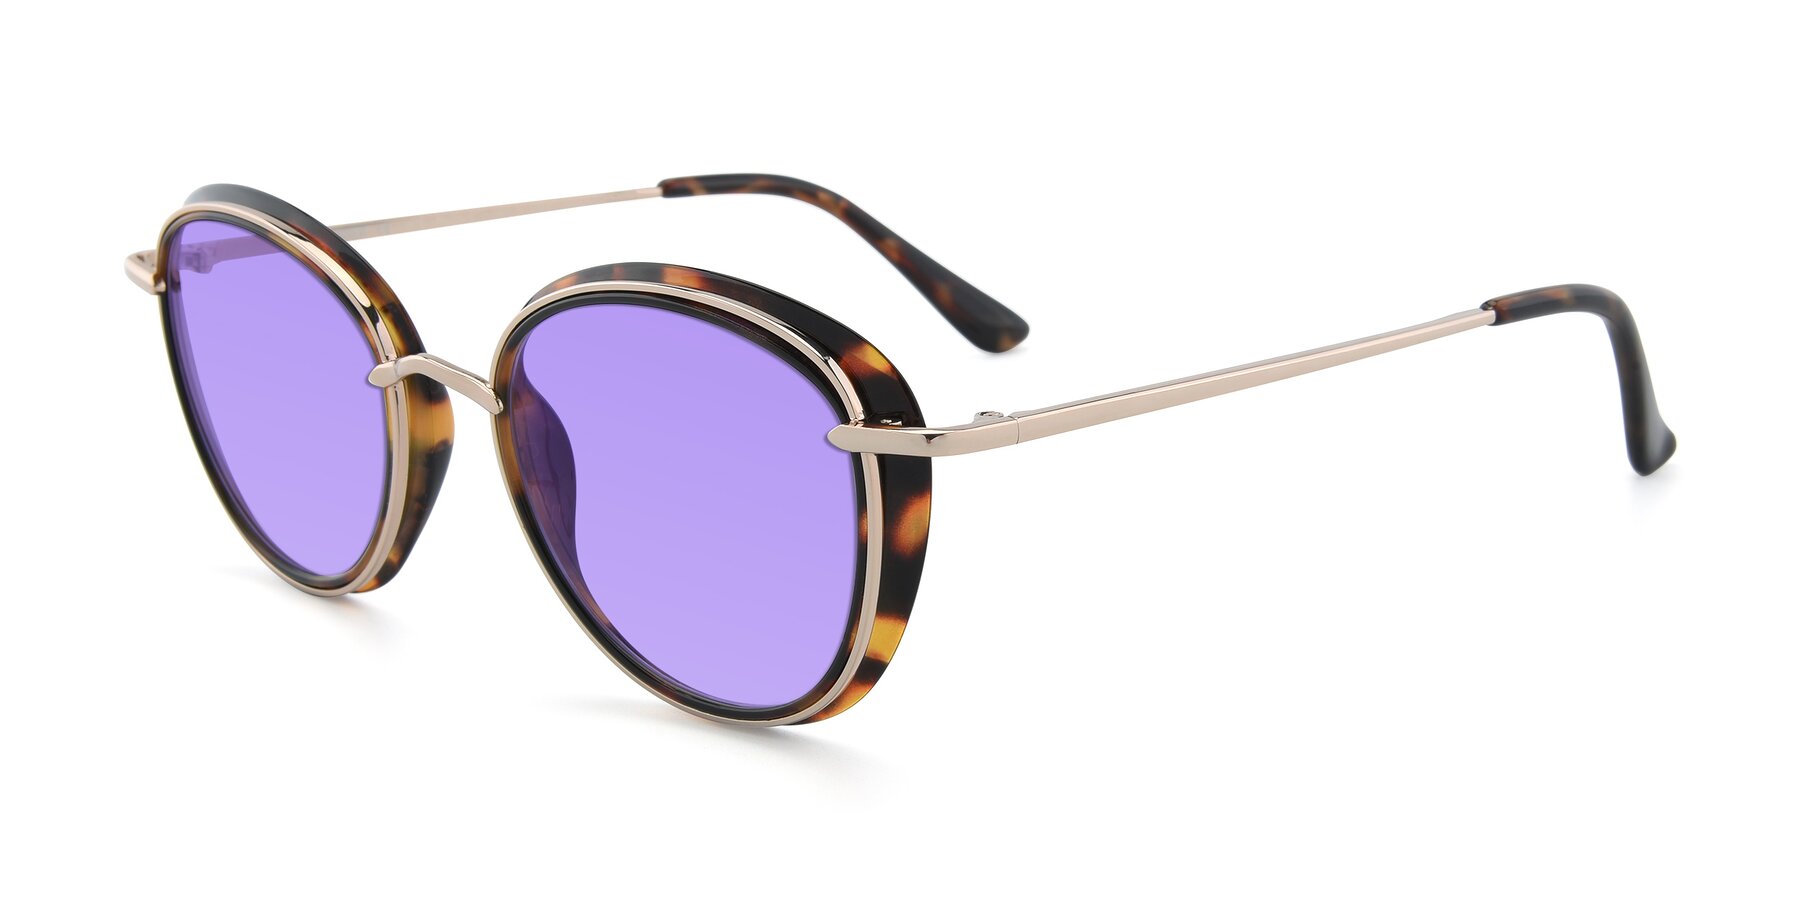 Angle of Cosmopolitan in Tortoise-Silver with Medium Purple Tinted Lenses